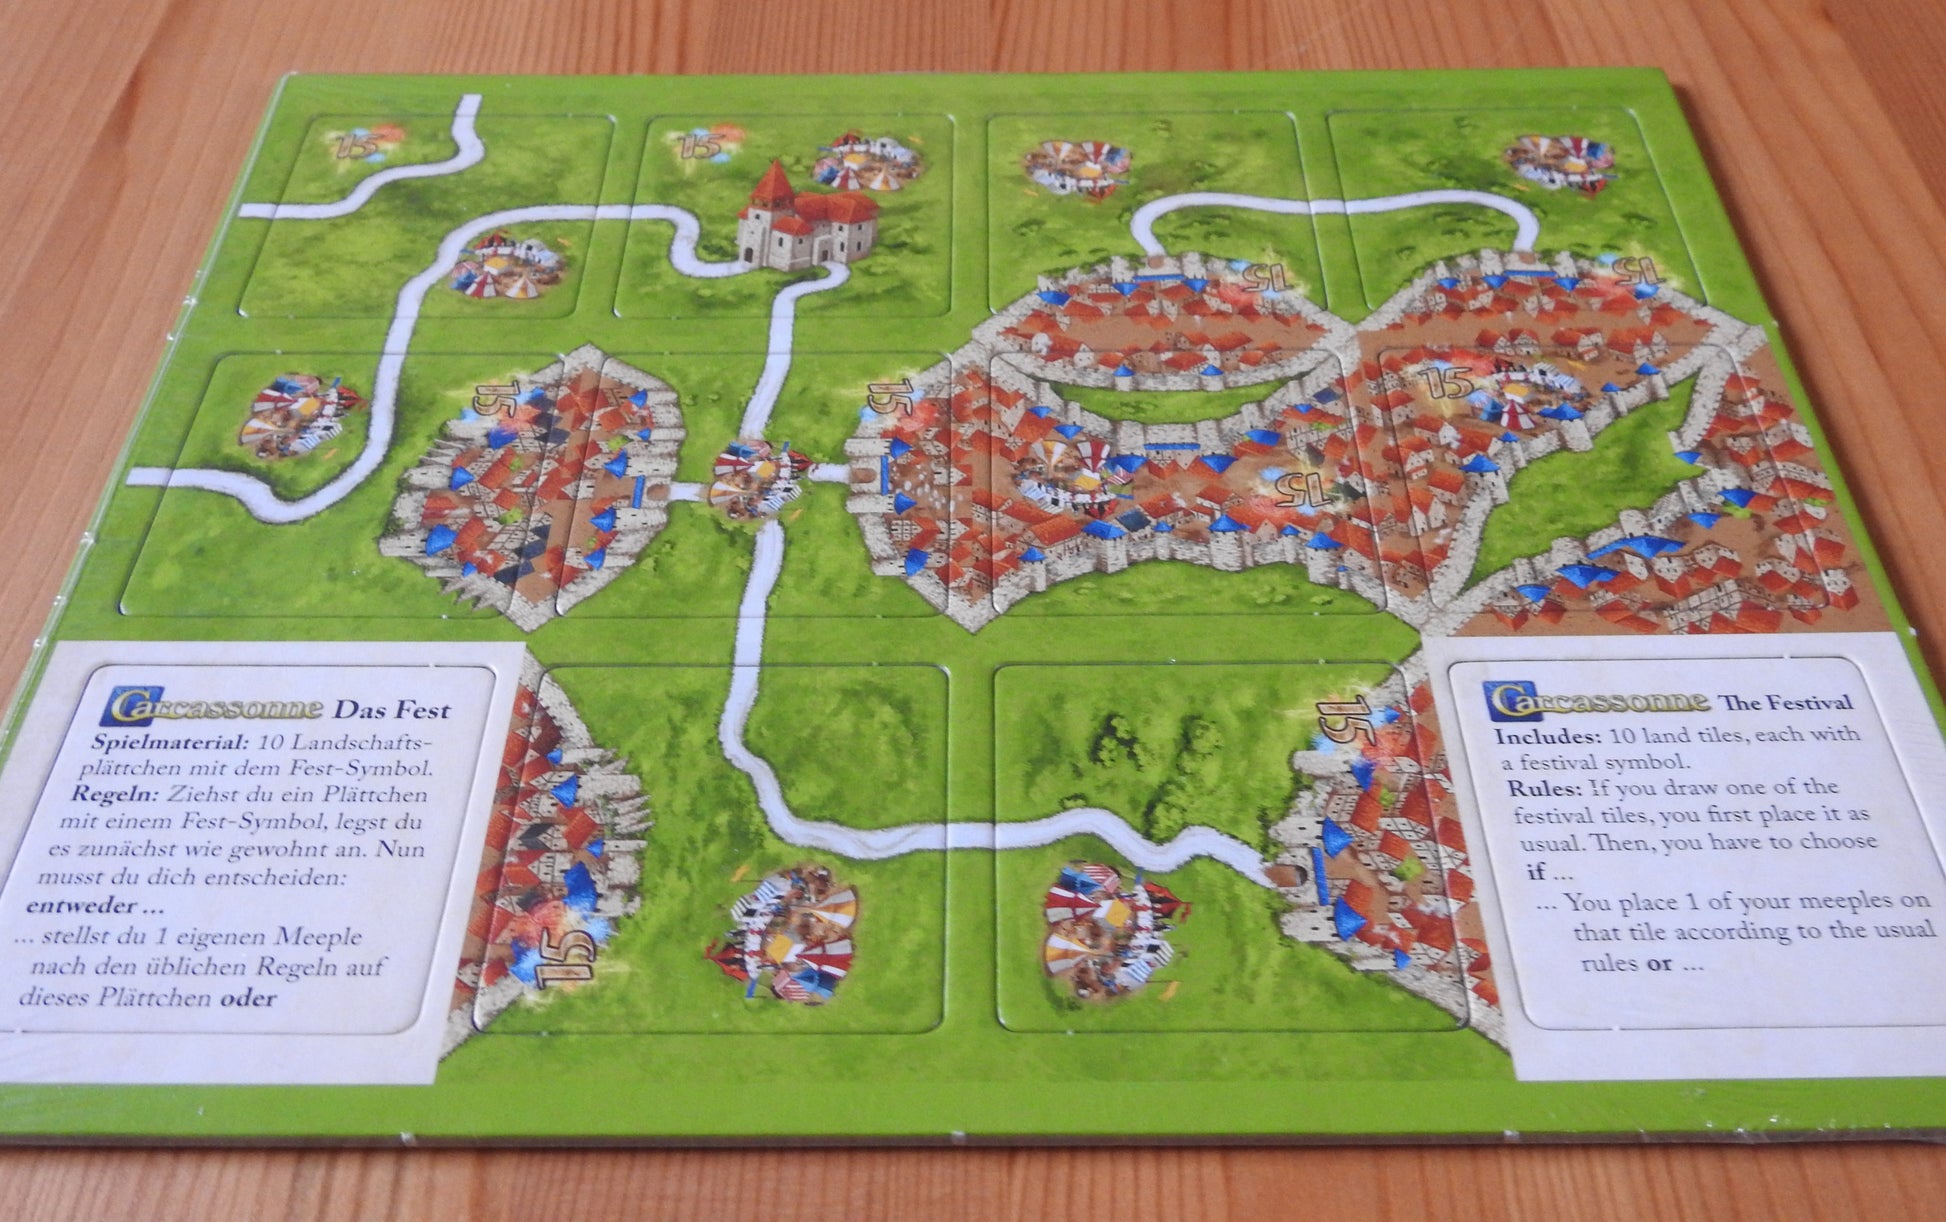 Different angle showing all the included tiles in this Carcassonne Festival II mini expansion.